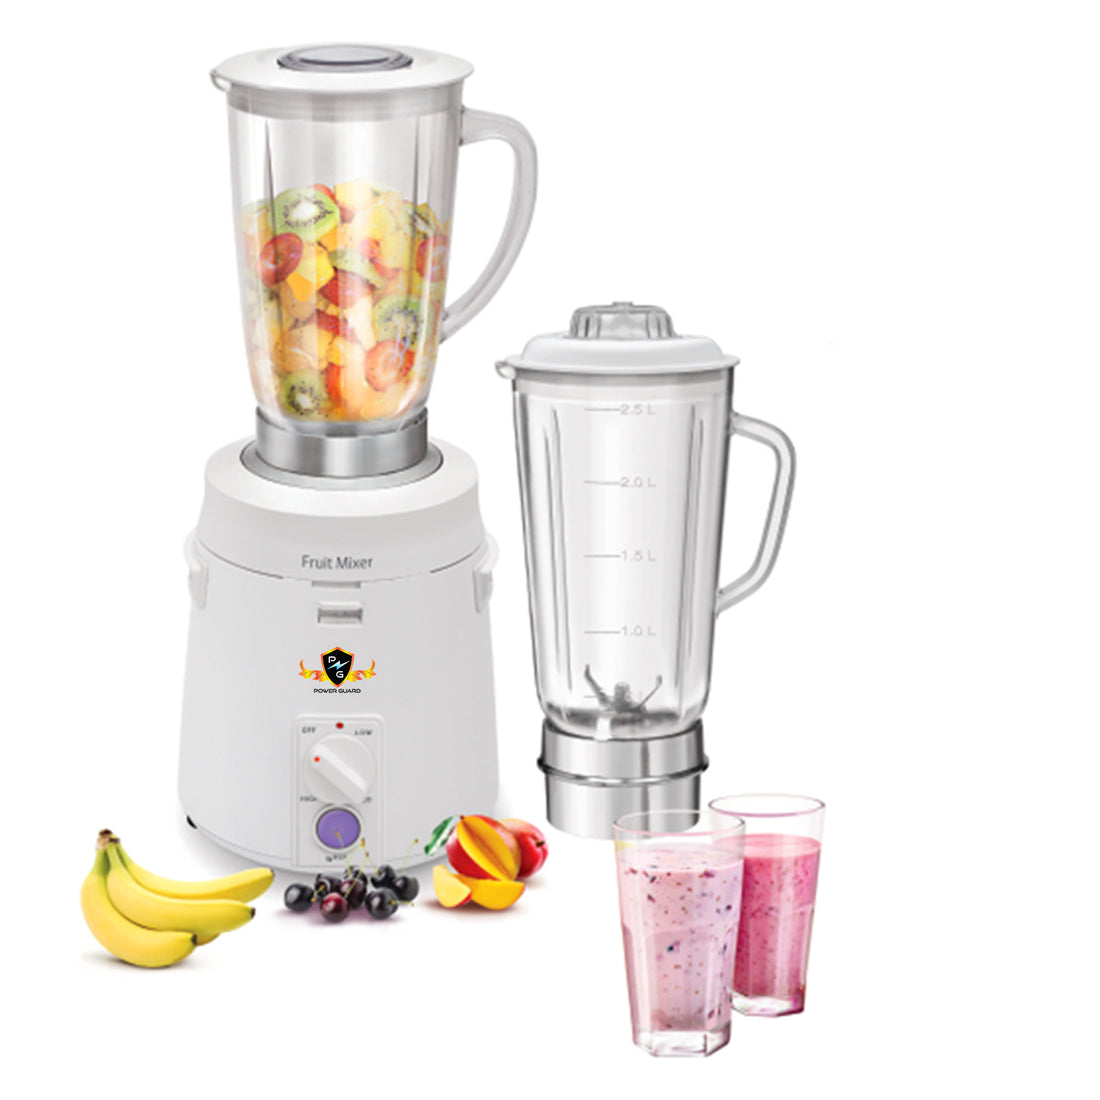 Top 5 Best Blender Mixer Machines for Perfect Blending and Grinding